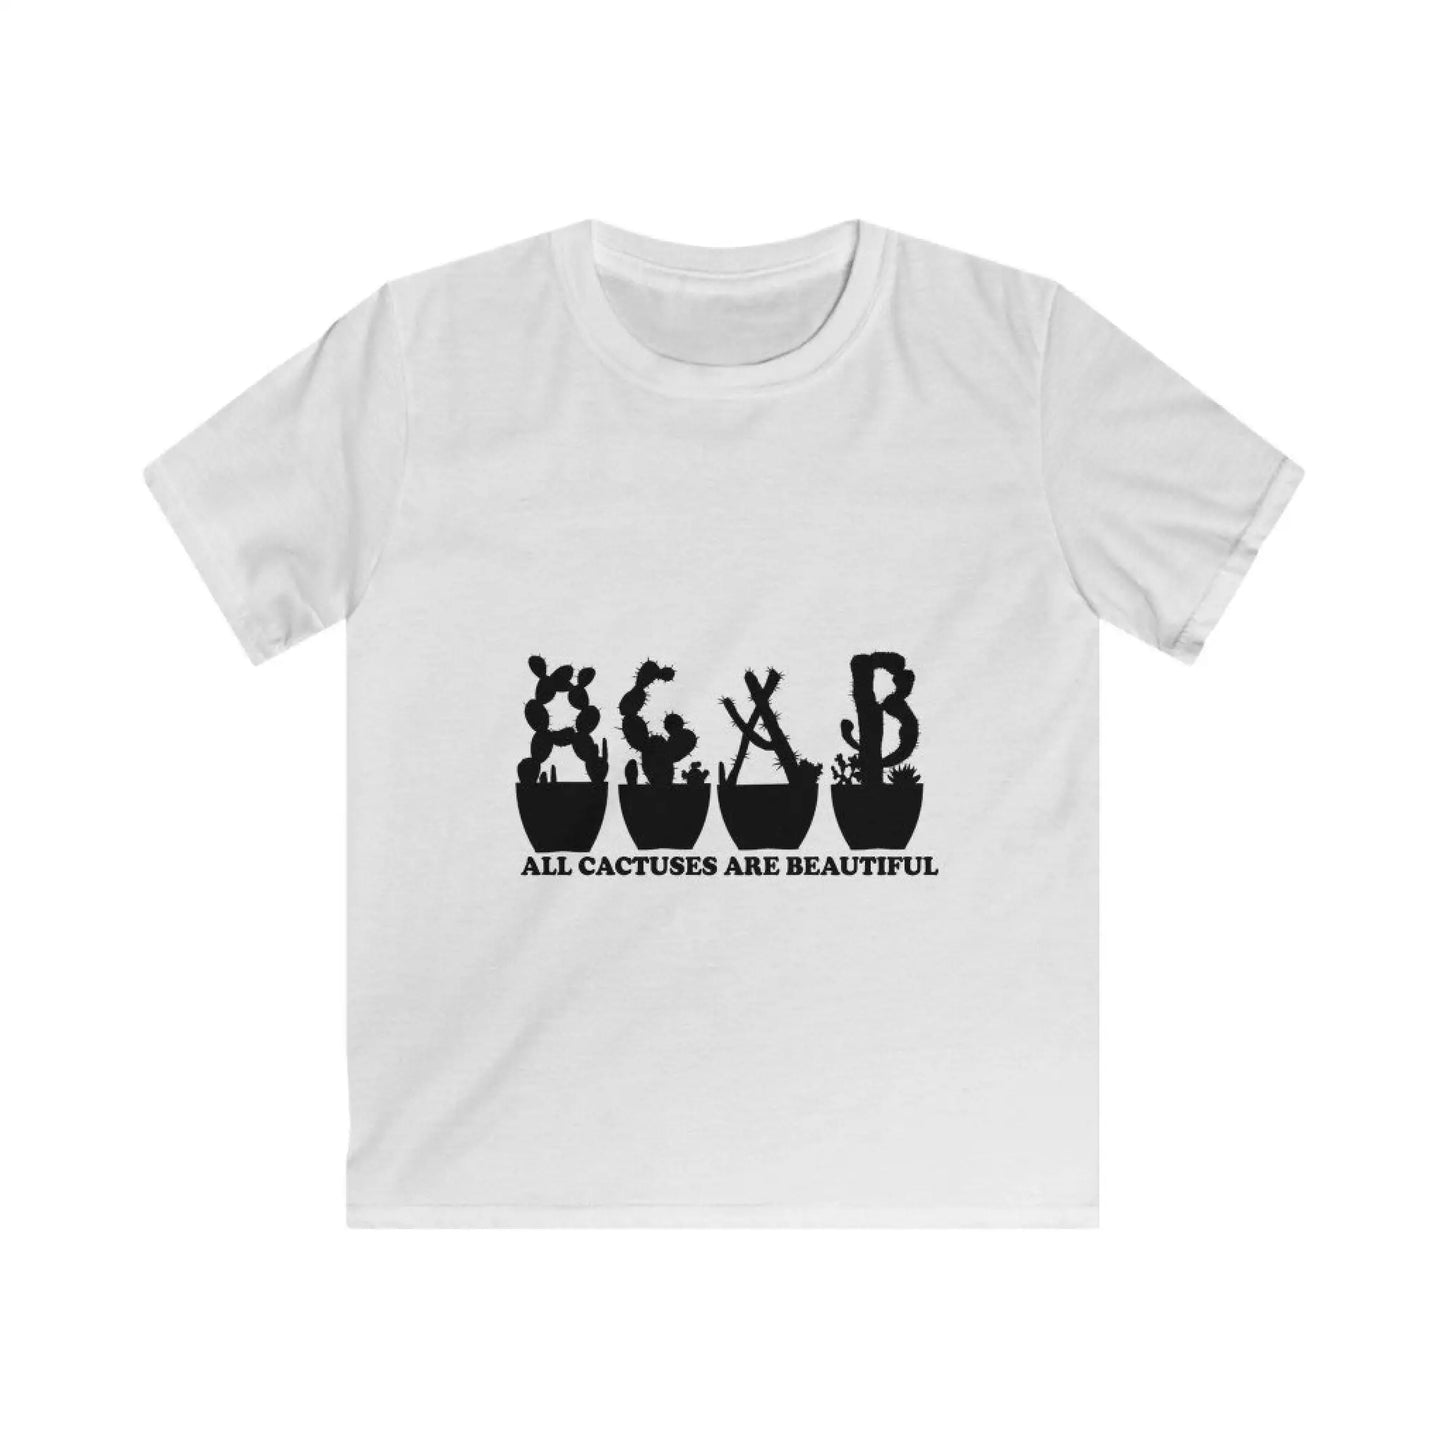 Kids Tee - All Cactuses Are Beautiful - XS / White - clothes